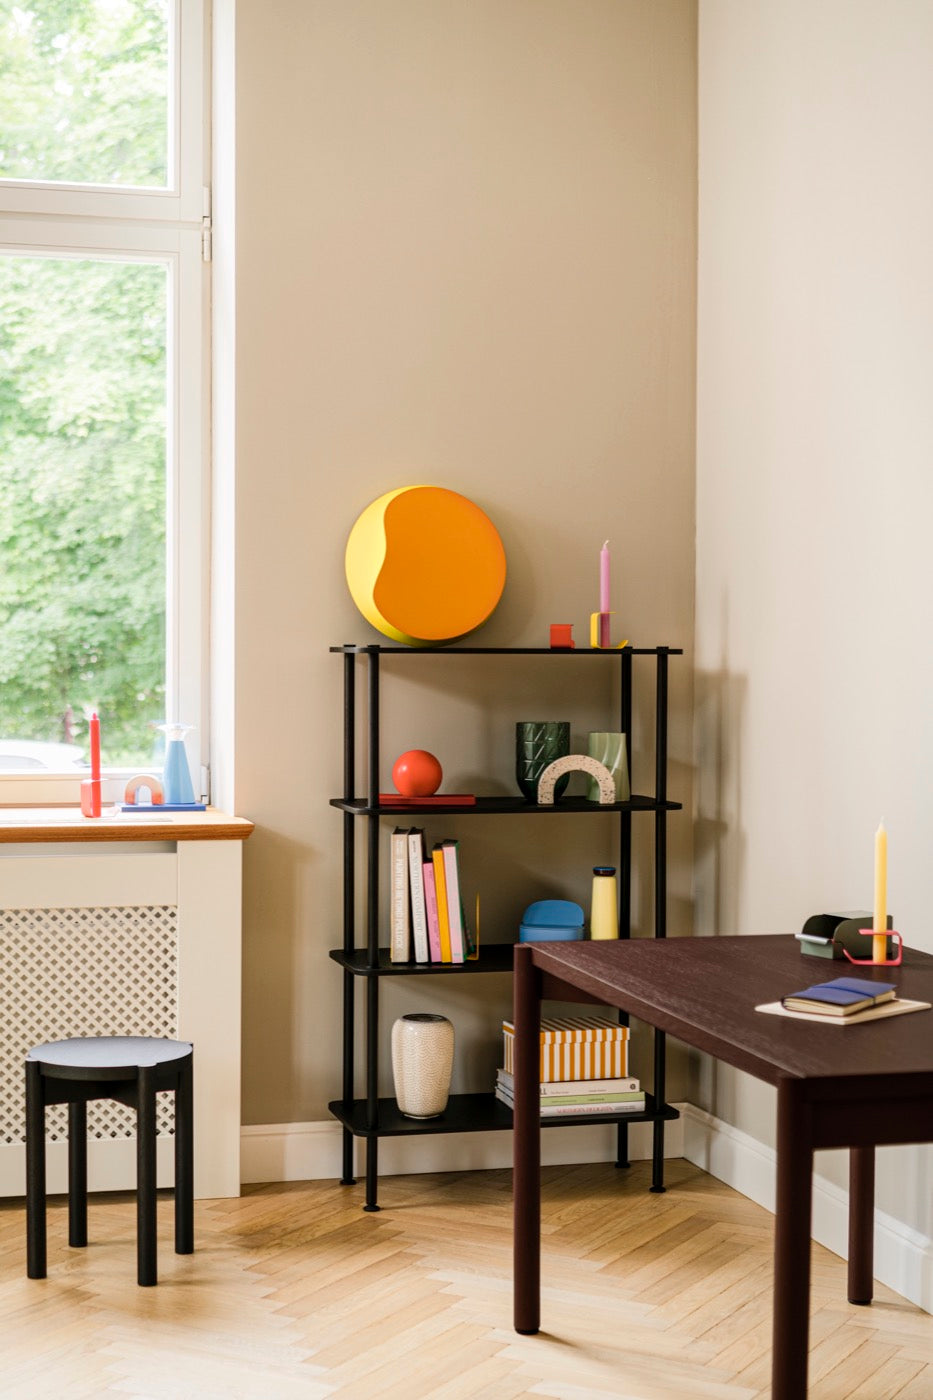 Who says work can't be fun? Our stylish and aesthetic home office furniture is here to prove otherwise. Check out desks, sideboards, shelving units, sofas, armchairs, trolleys, and more for ideas to elevate your small, spacious, or aesthetic home office.